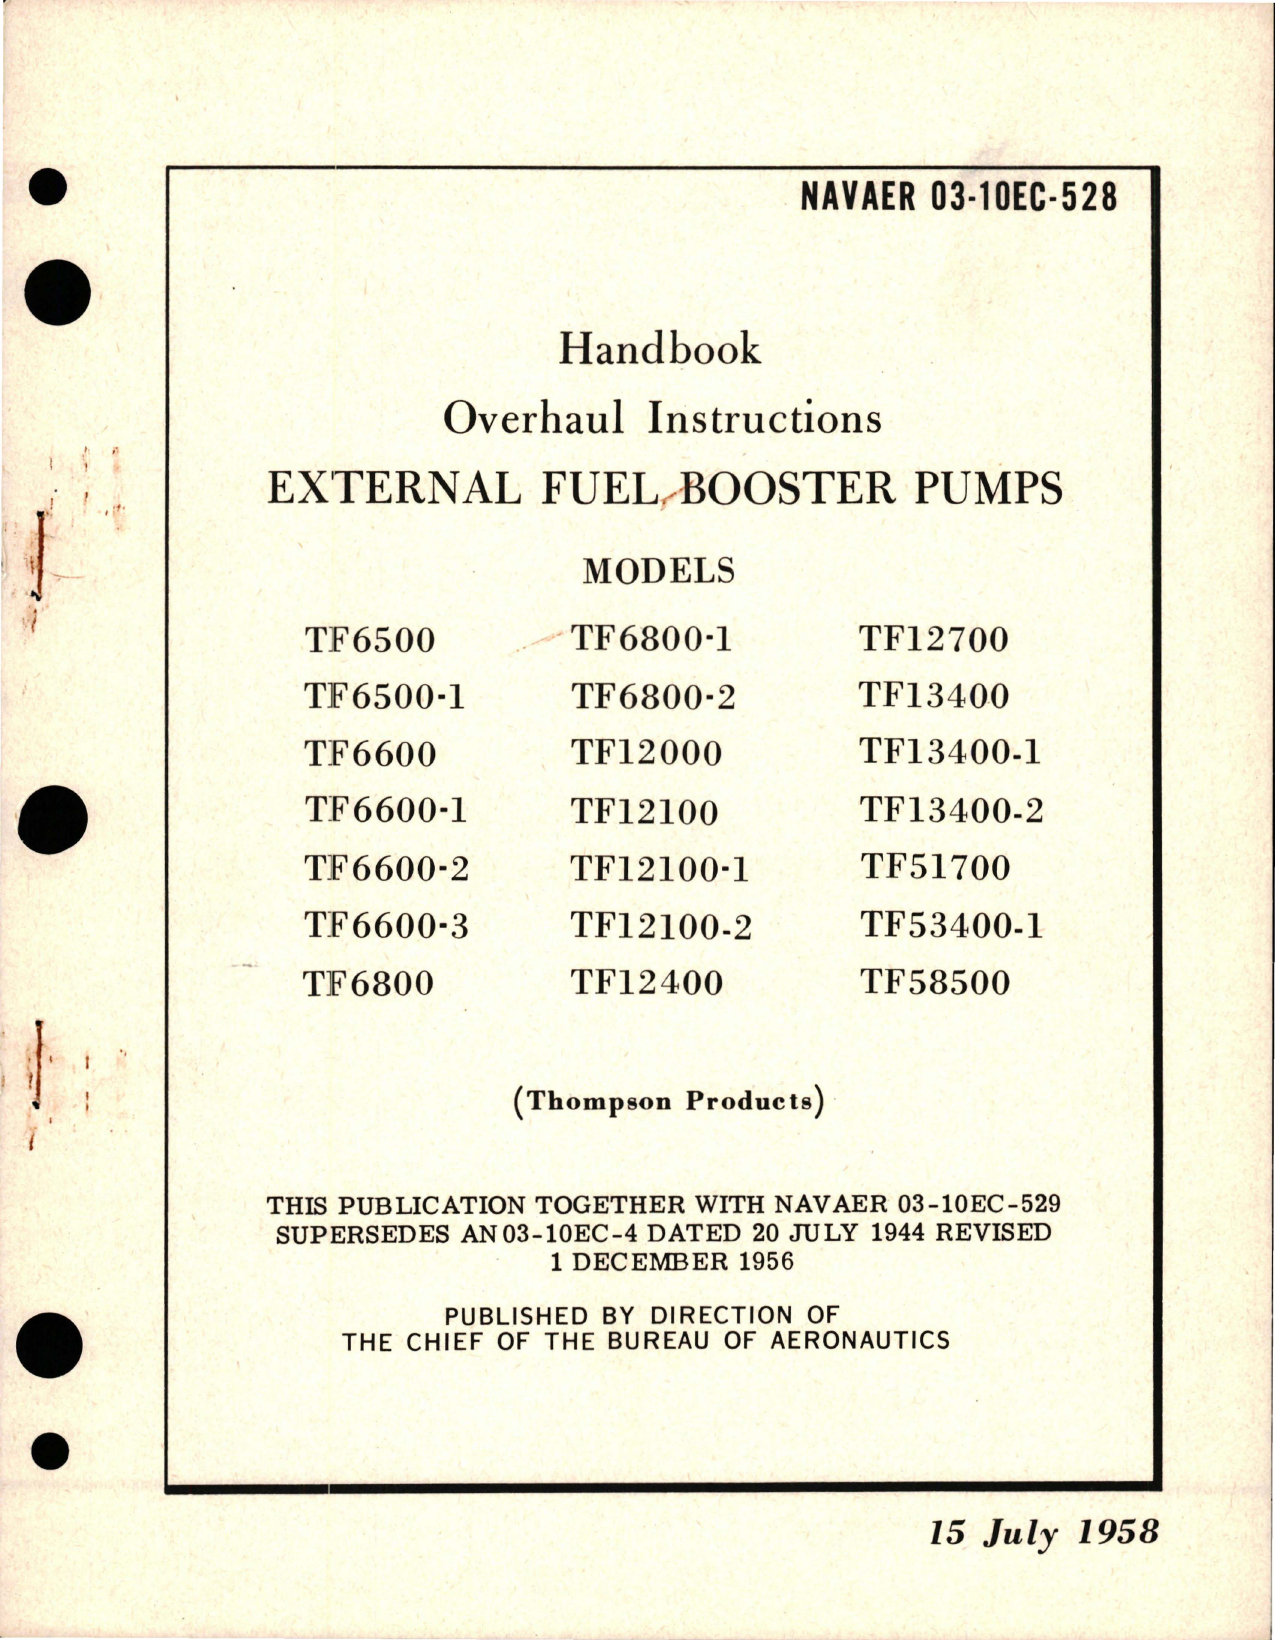 Sample page 1 from AirCorps Library document: Overhaul Instructions for External Fuel Booster Pumps